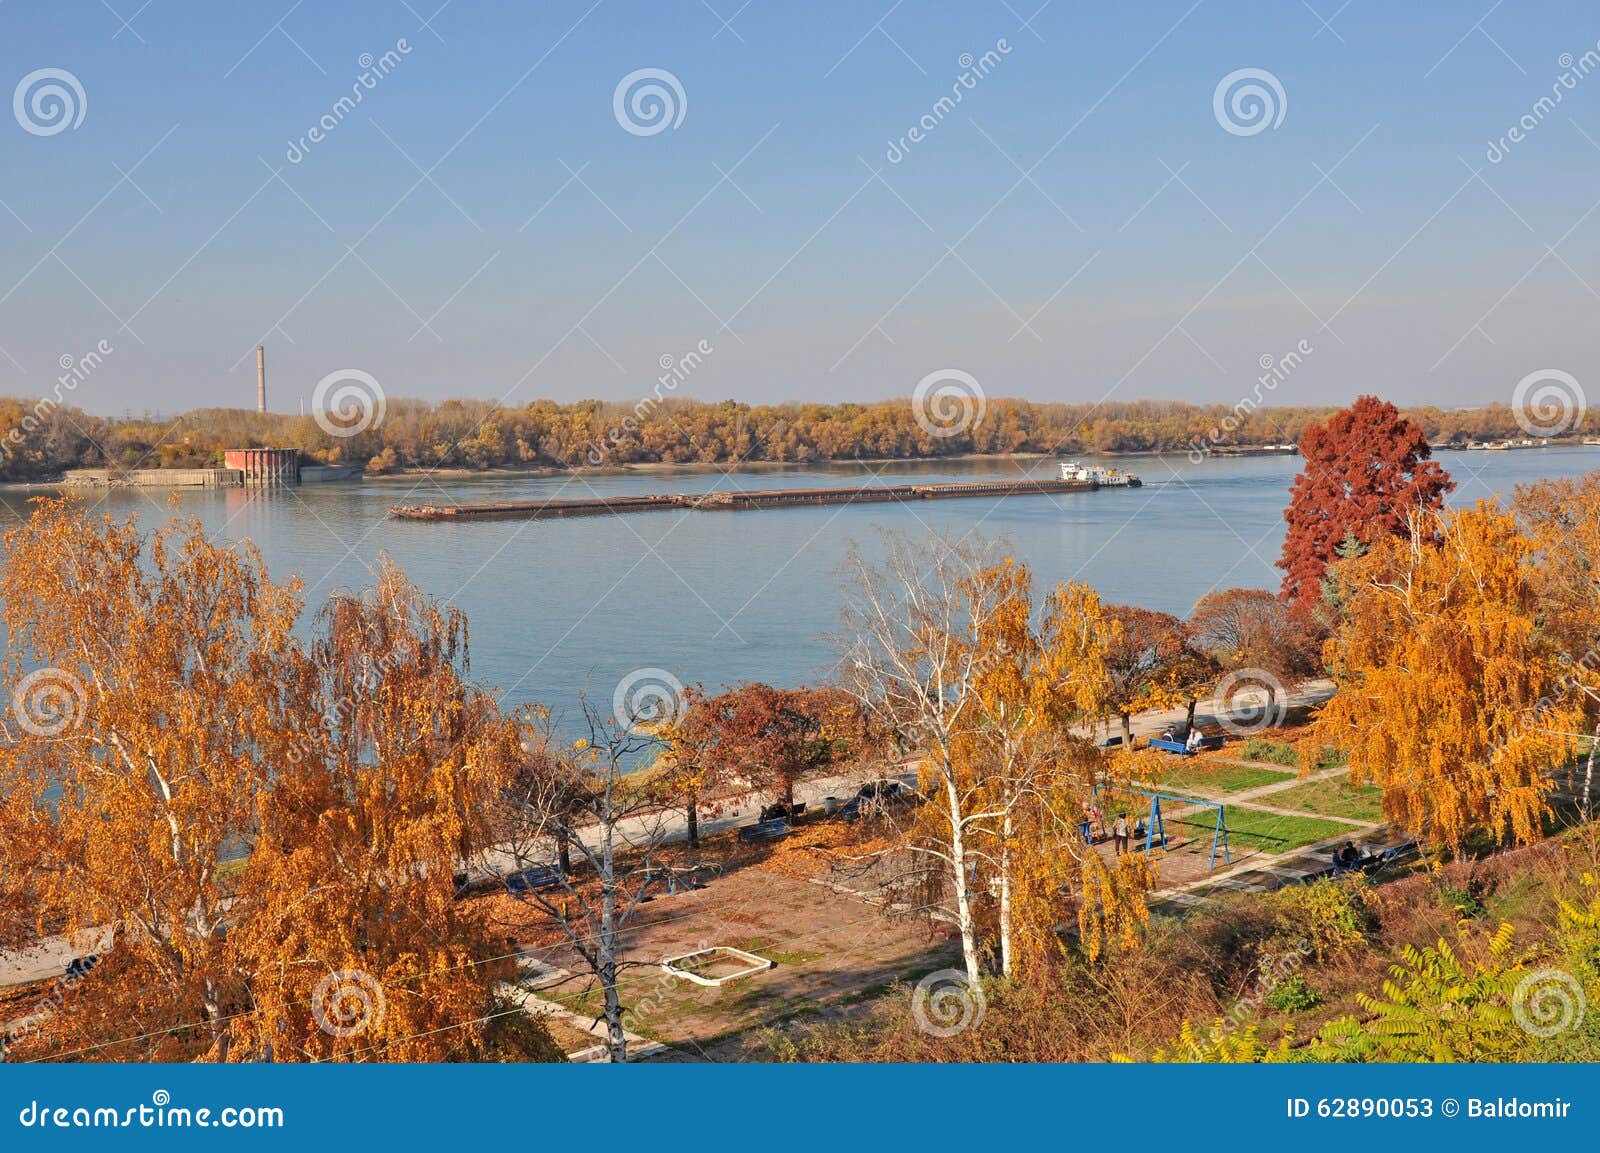 Danube landscapes of the great river